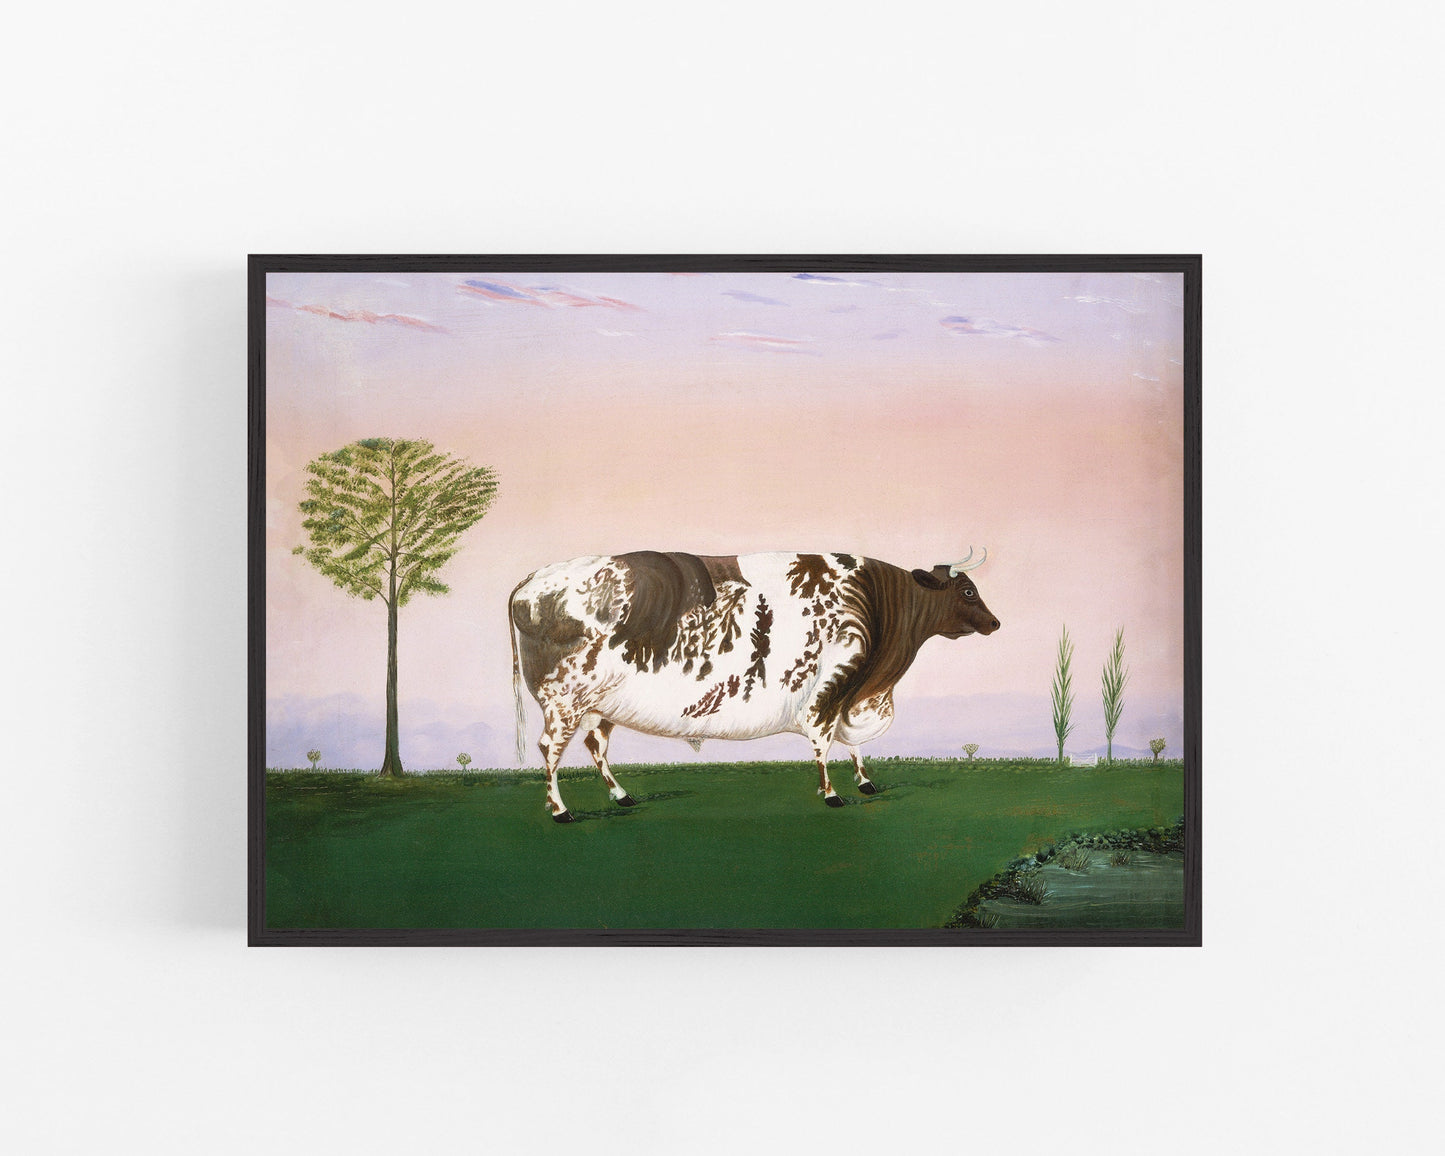 Vintage cow art | Prize bull by H. Call | Farm and ranch print | Folk art natural history | Modern vintage décor | Eco-friendly gift